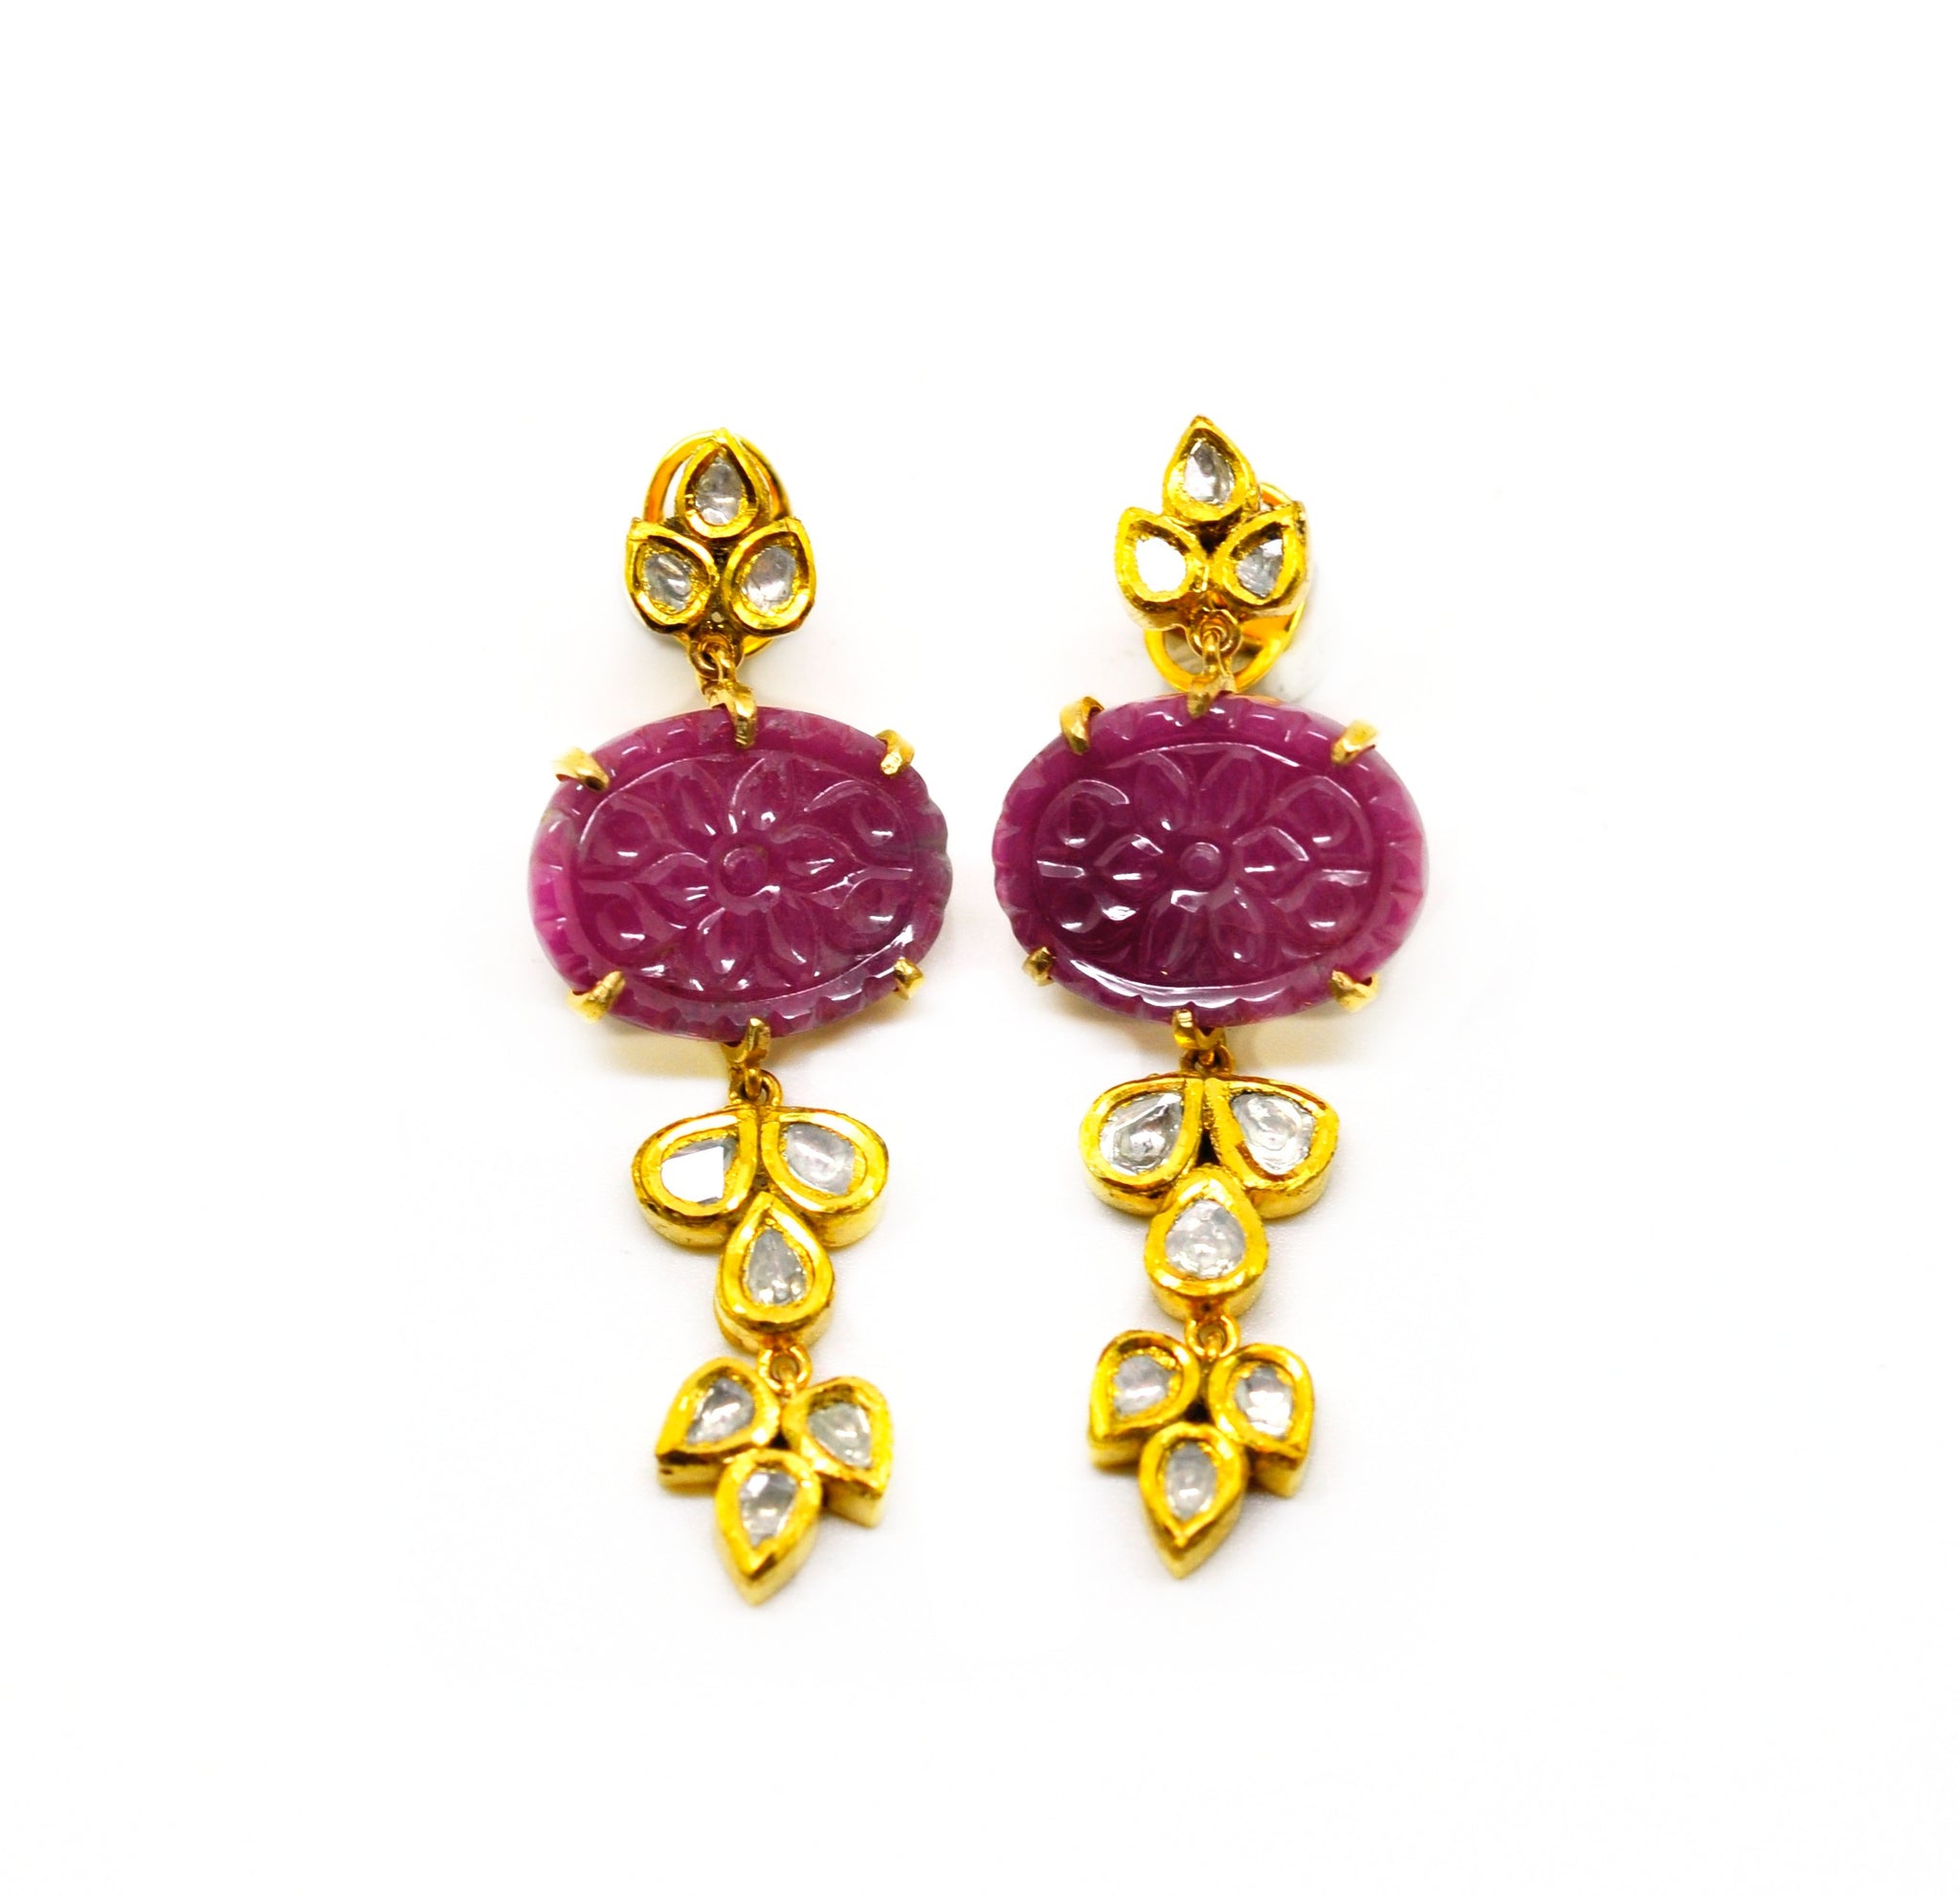 SOLD - NEW Carved Ruby and Polki earring